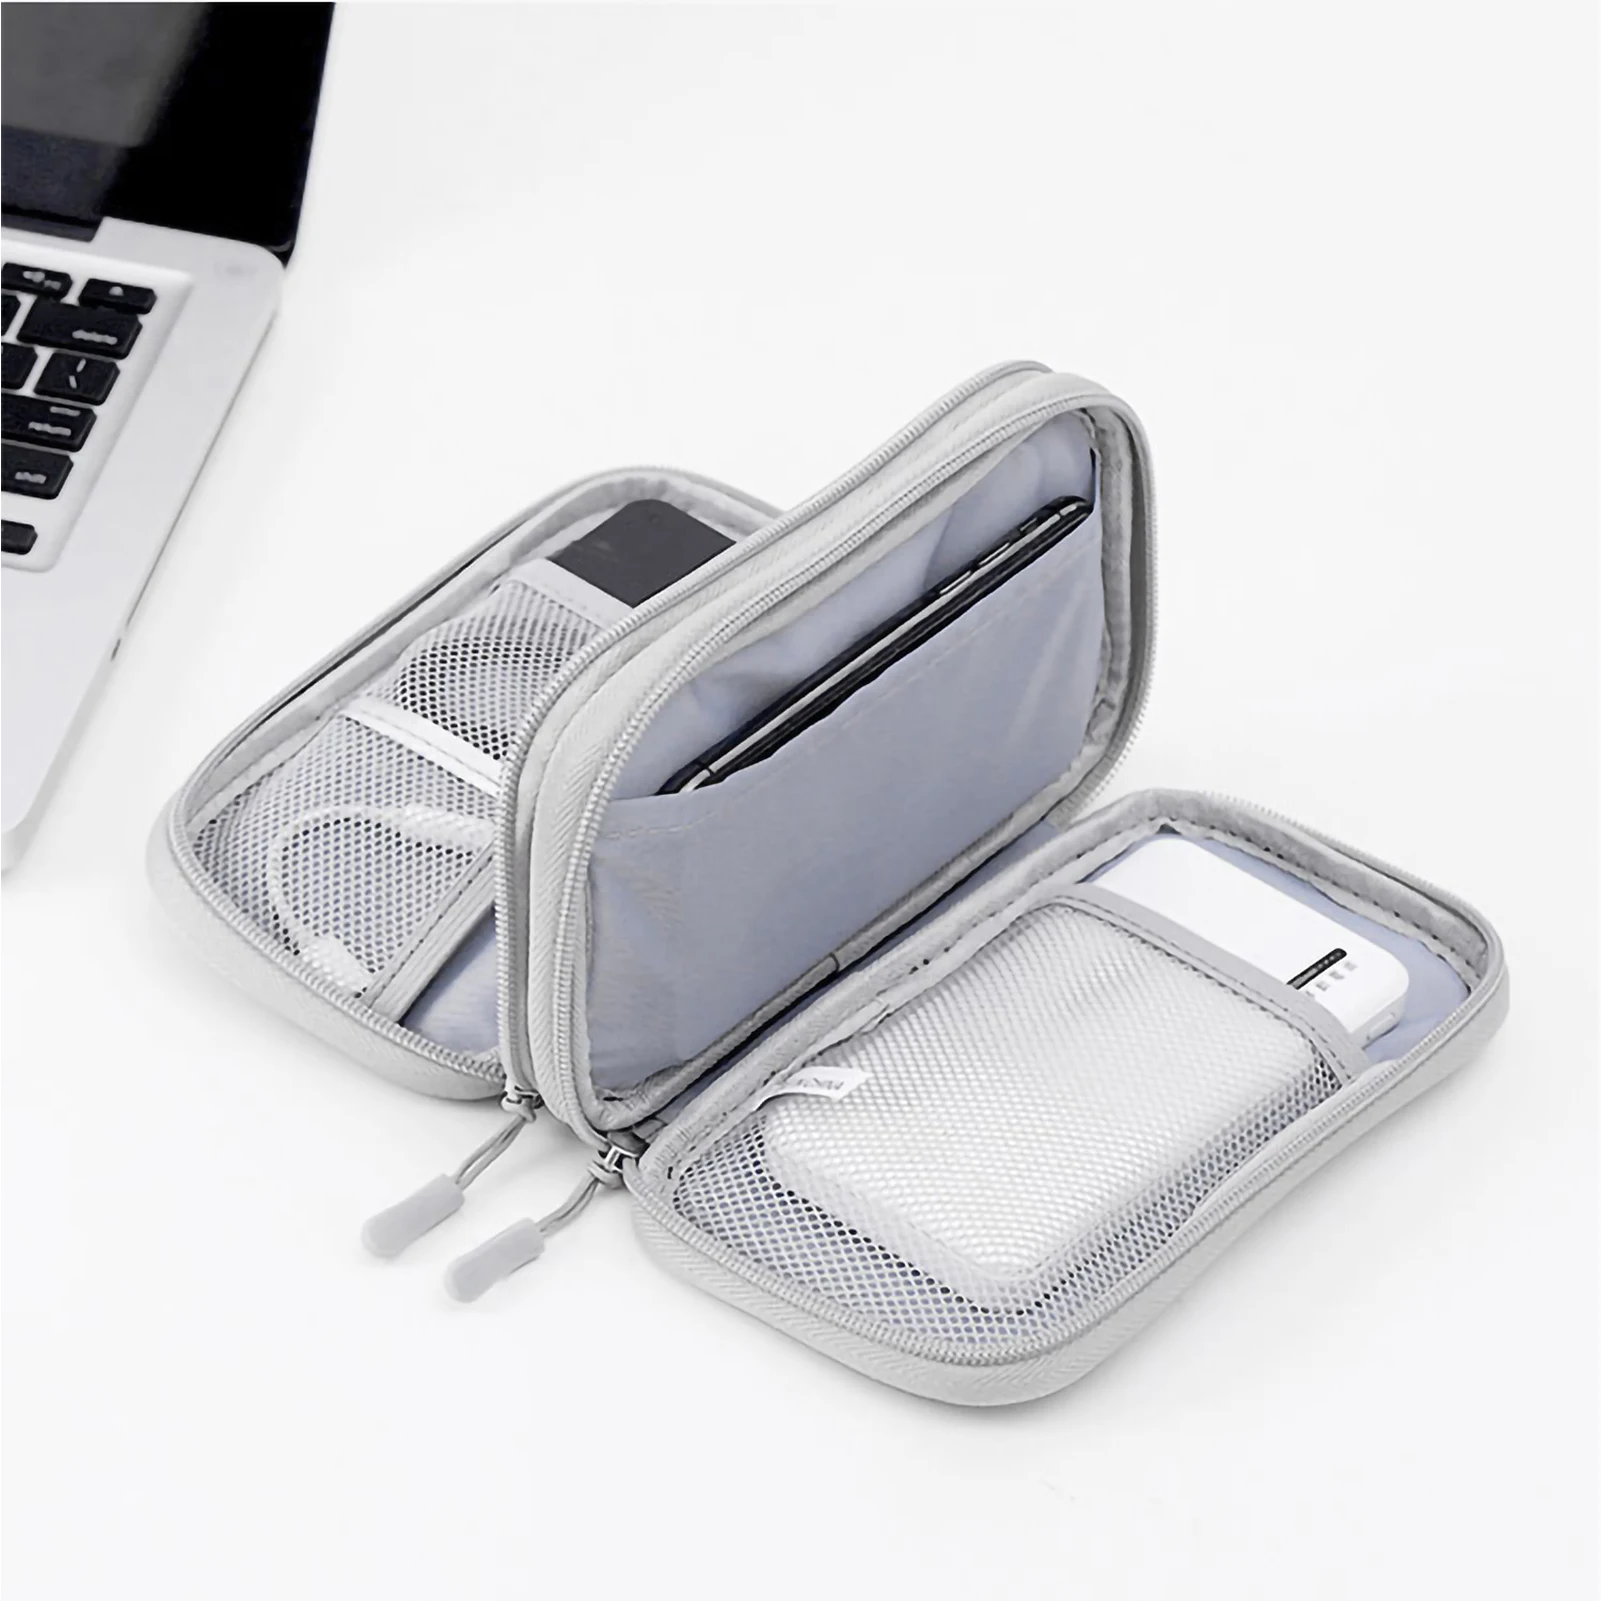 

Waterproof Travel Organizer Bag Data Cable Storage Bag Portable Carry Case Double Layers Organization for Cable Cord USB Charger